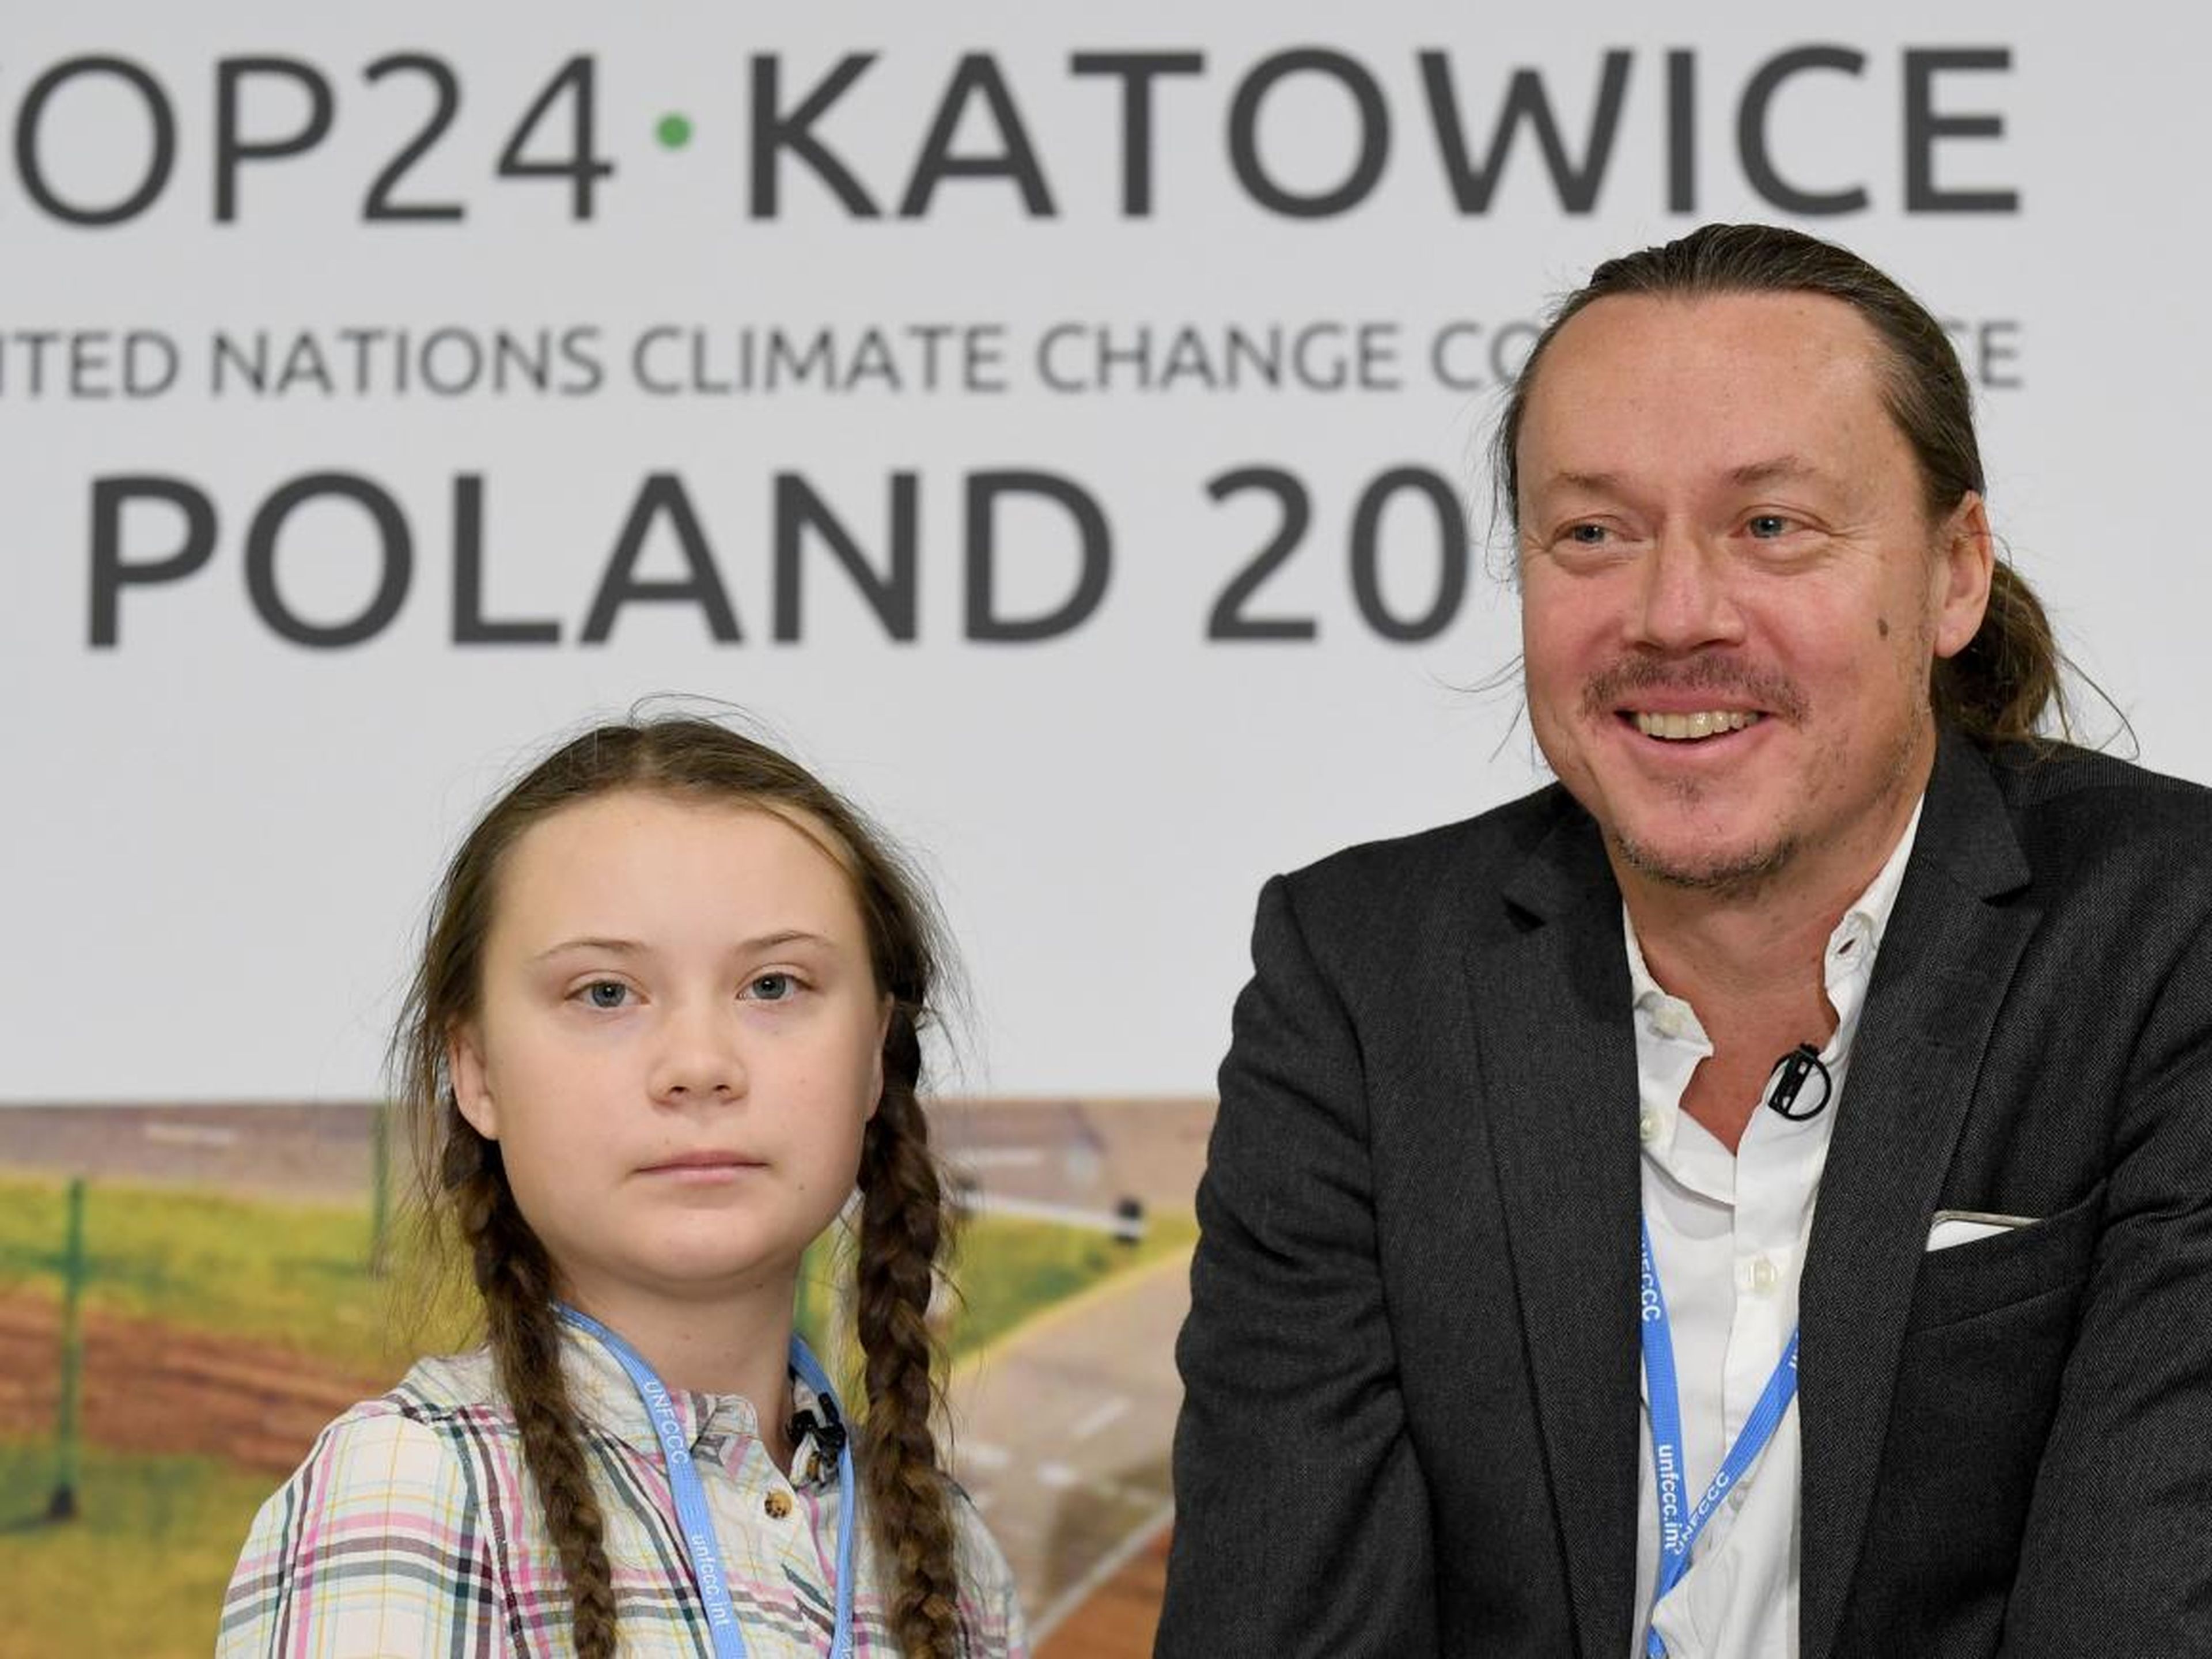 Greta Thunberg and her father, Svante, at a press conference during the COP24 summit in Katowice, Poland, in December 2018.